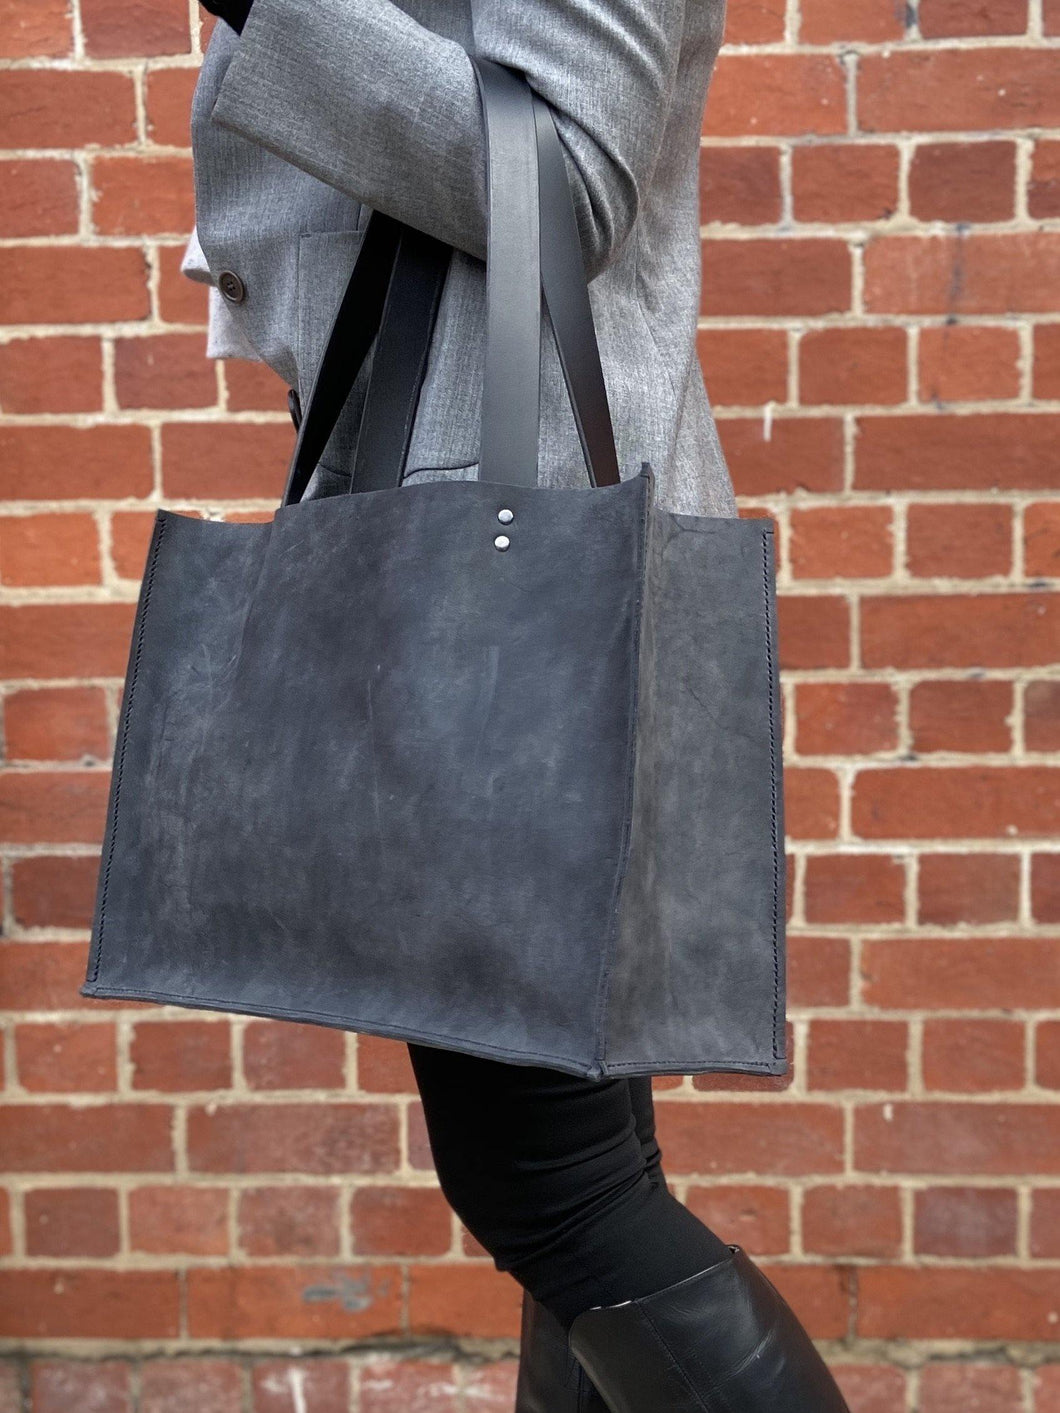 Distressed leather tote - Houseofsamdesigns